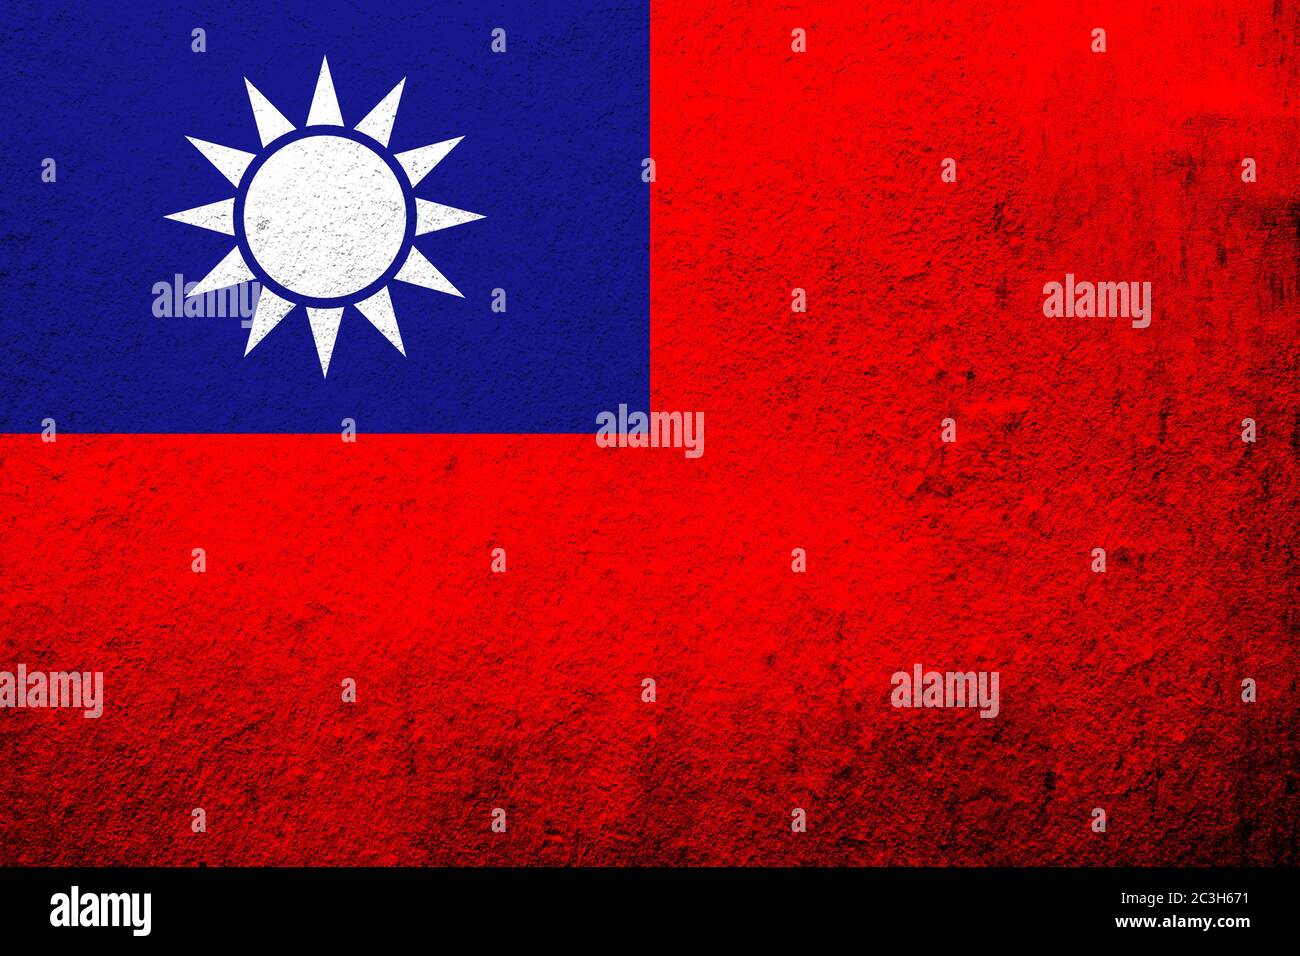 the Republic of China (Taiwan) National flag Blue Sky, White Sun, and a Wholly Red Earth. Grunge background Stock Photo